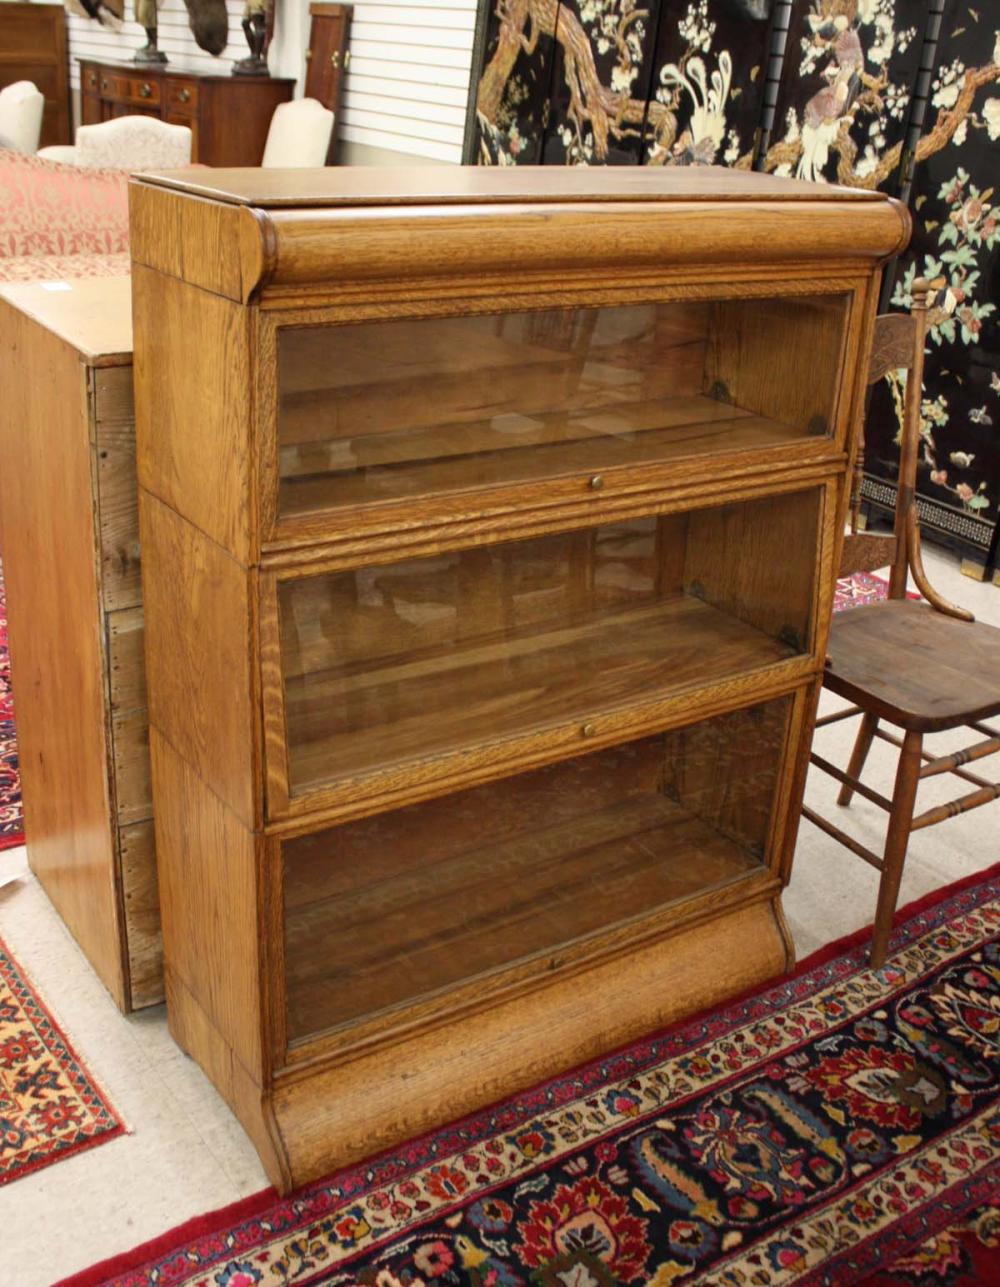 THREE-SECTION STACKING OAK BOOKCASE,